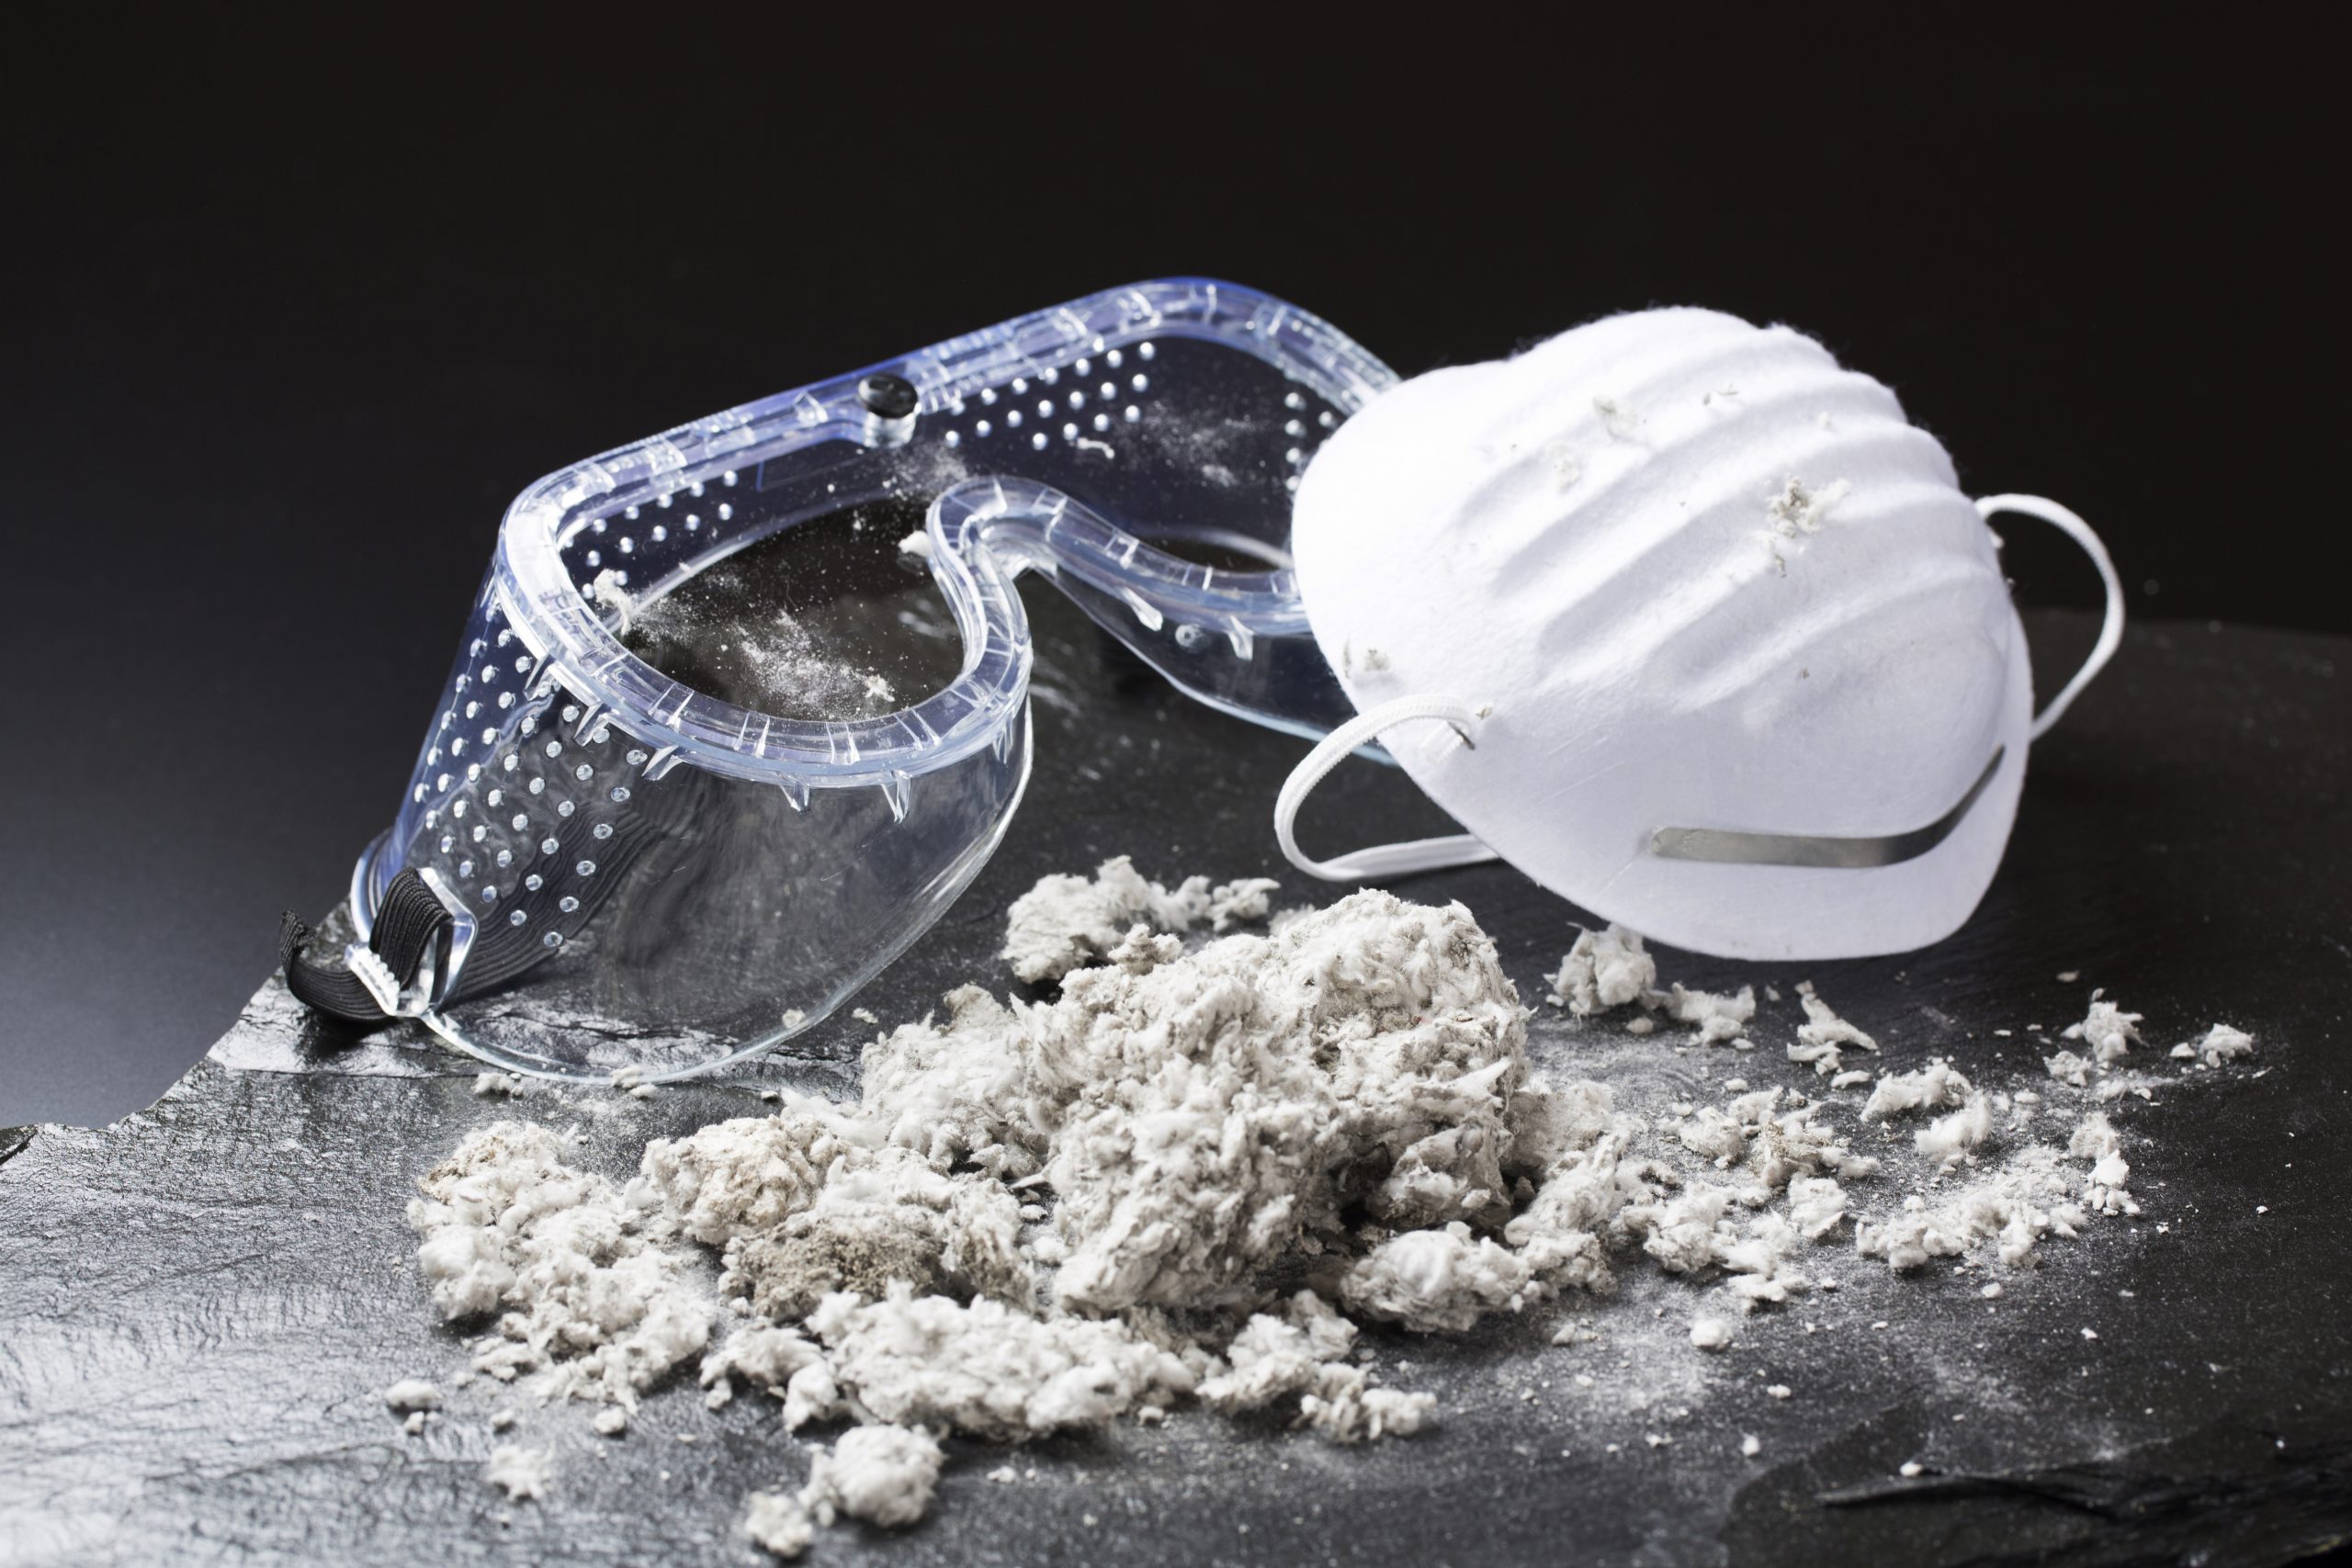 5 reasons to test for asbestos blog image of asbestos and mask